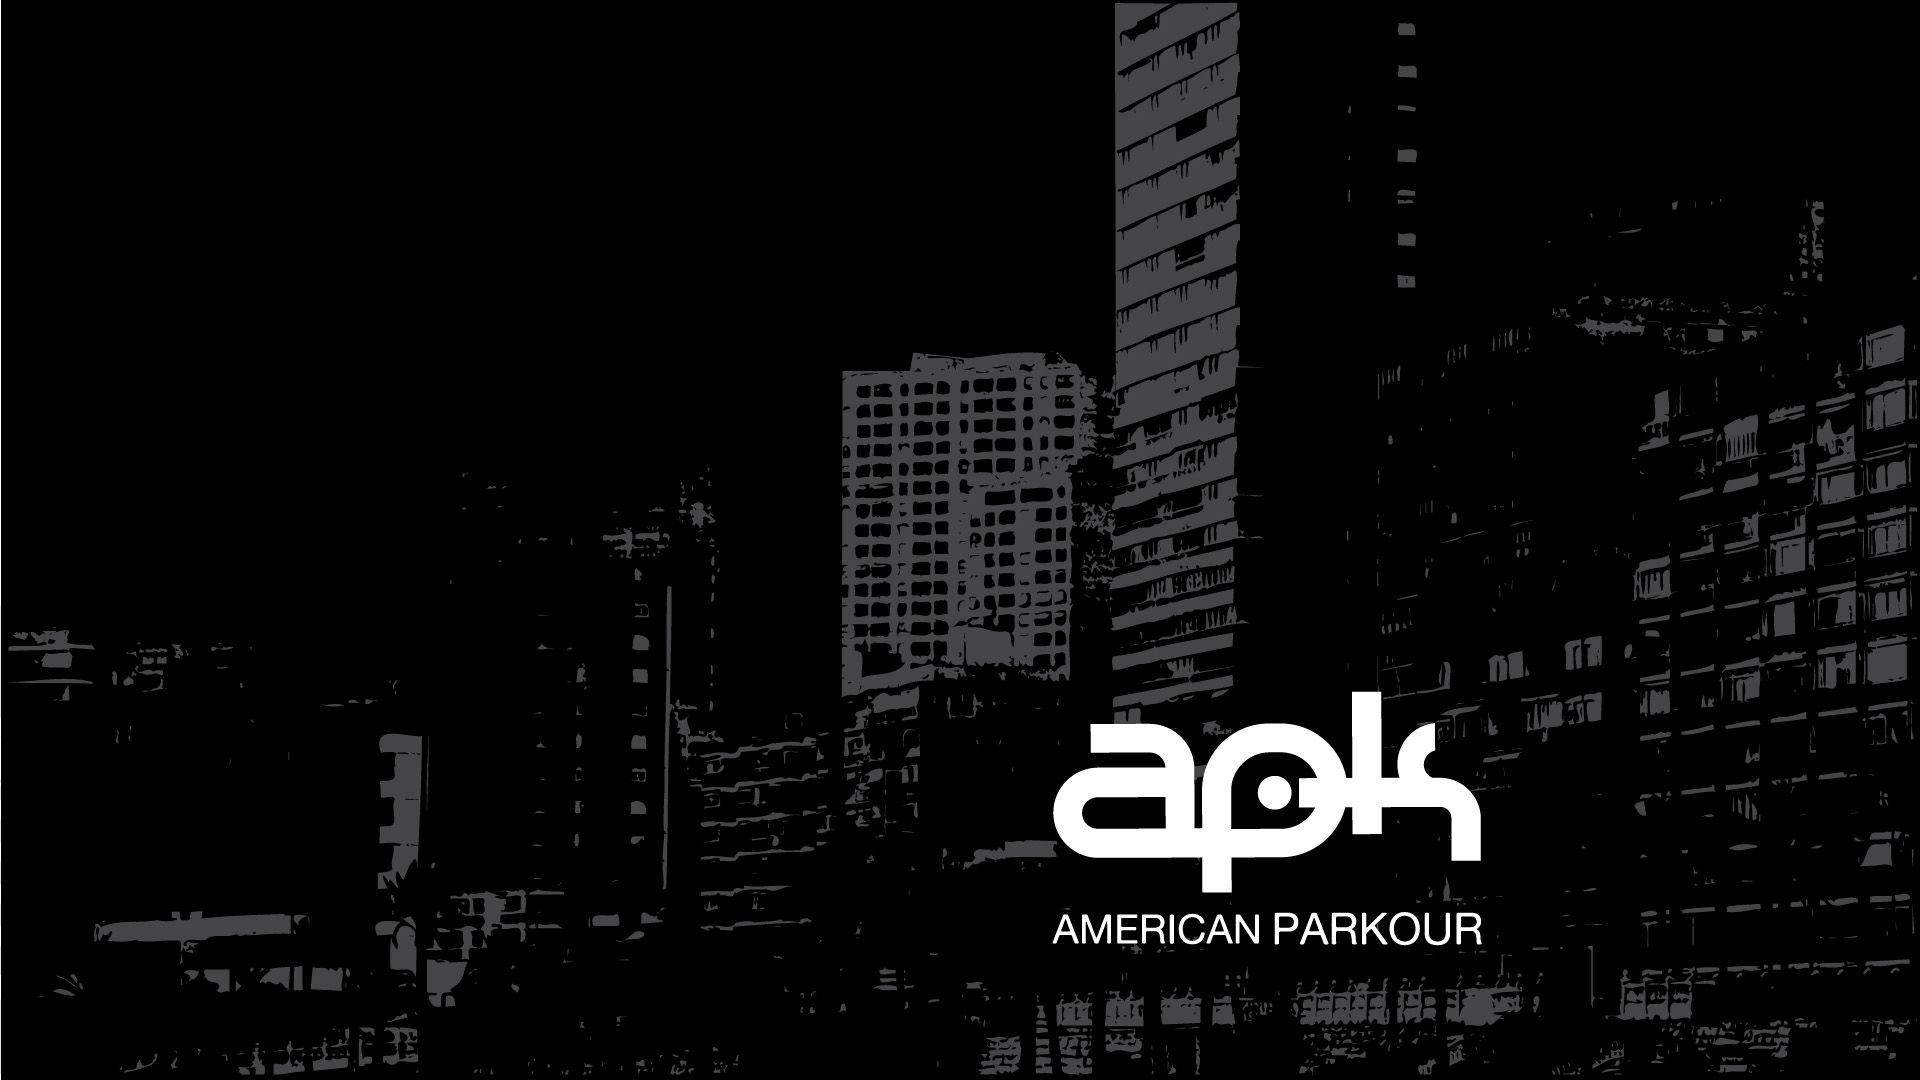 Download the American Parkour Wallpaper, American Parkour iPhone